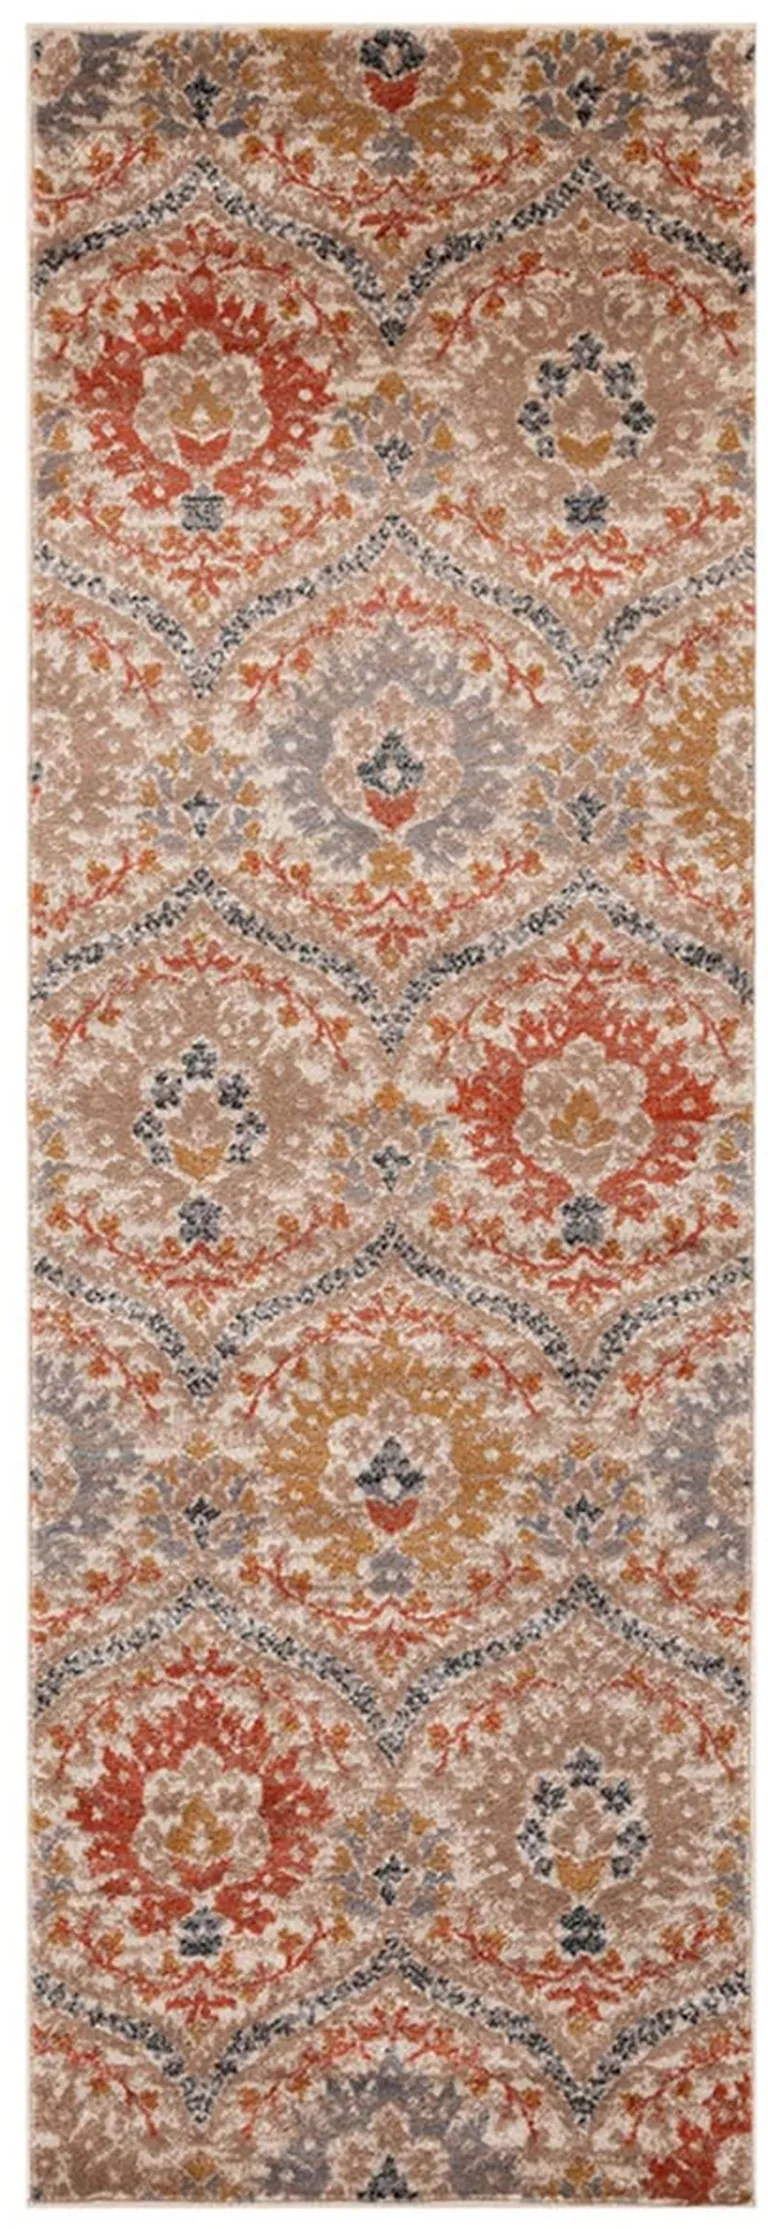 10' Ivory Orange And Gray Floral Stain Resistant Runner Rug Photo 1